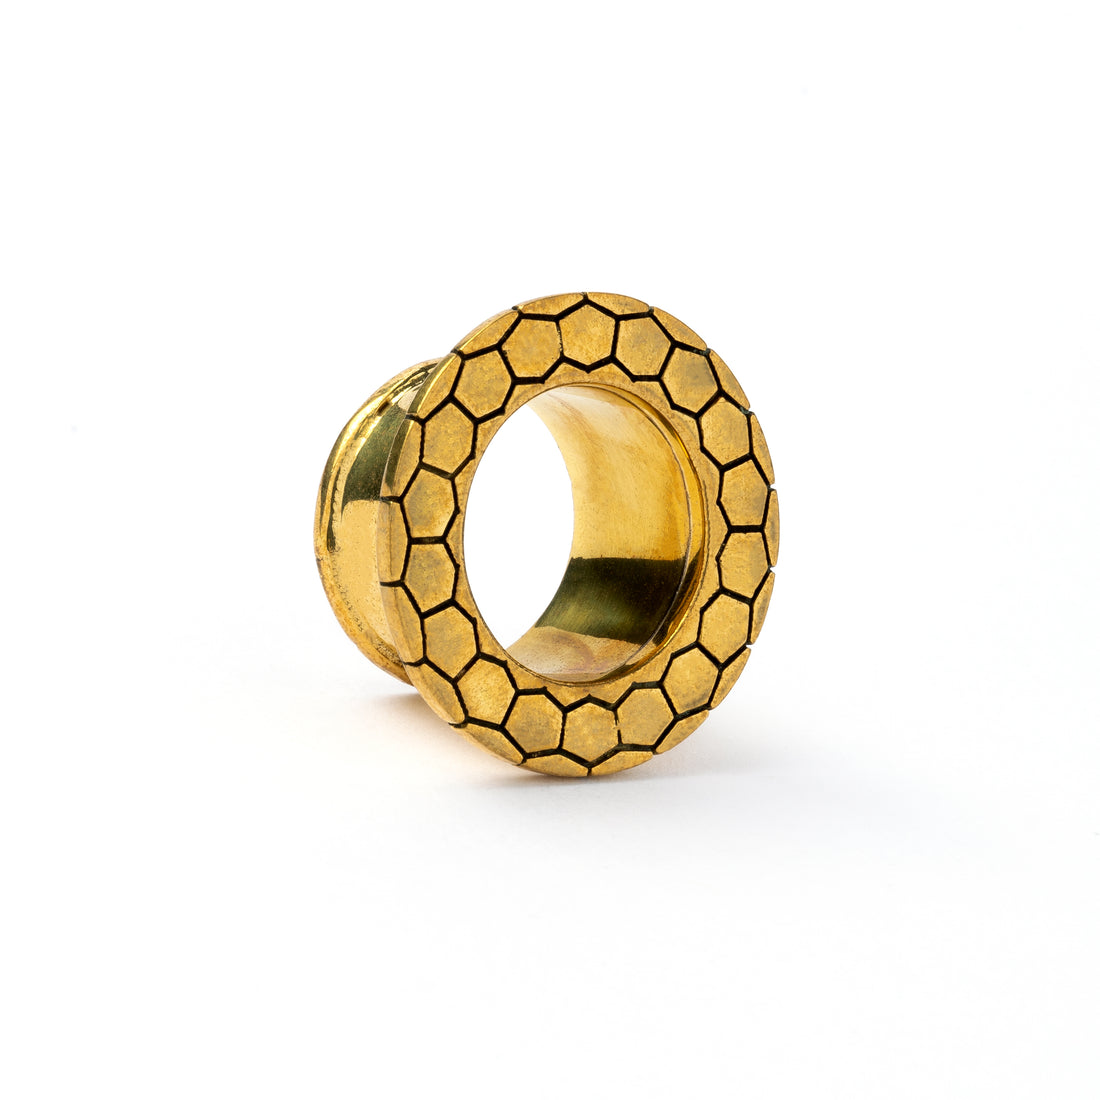 Honeycomb golden brass flesh tunnel for stretched ears right side view